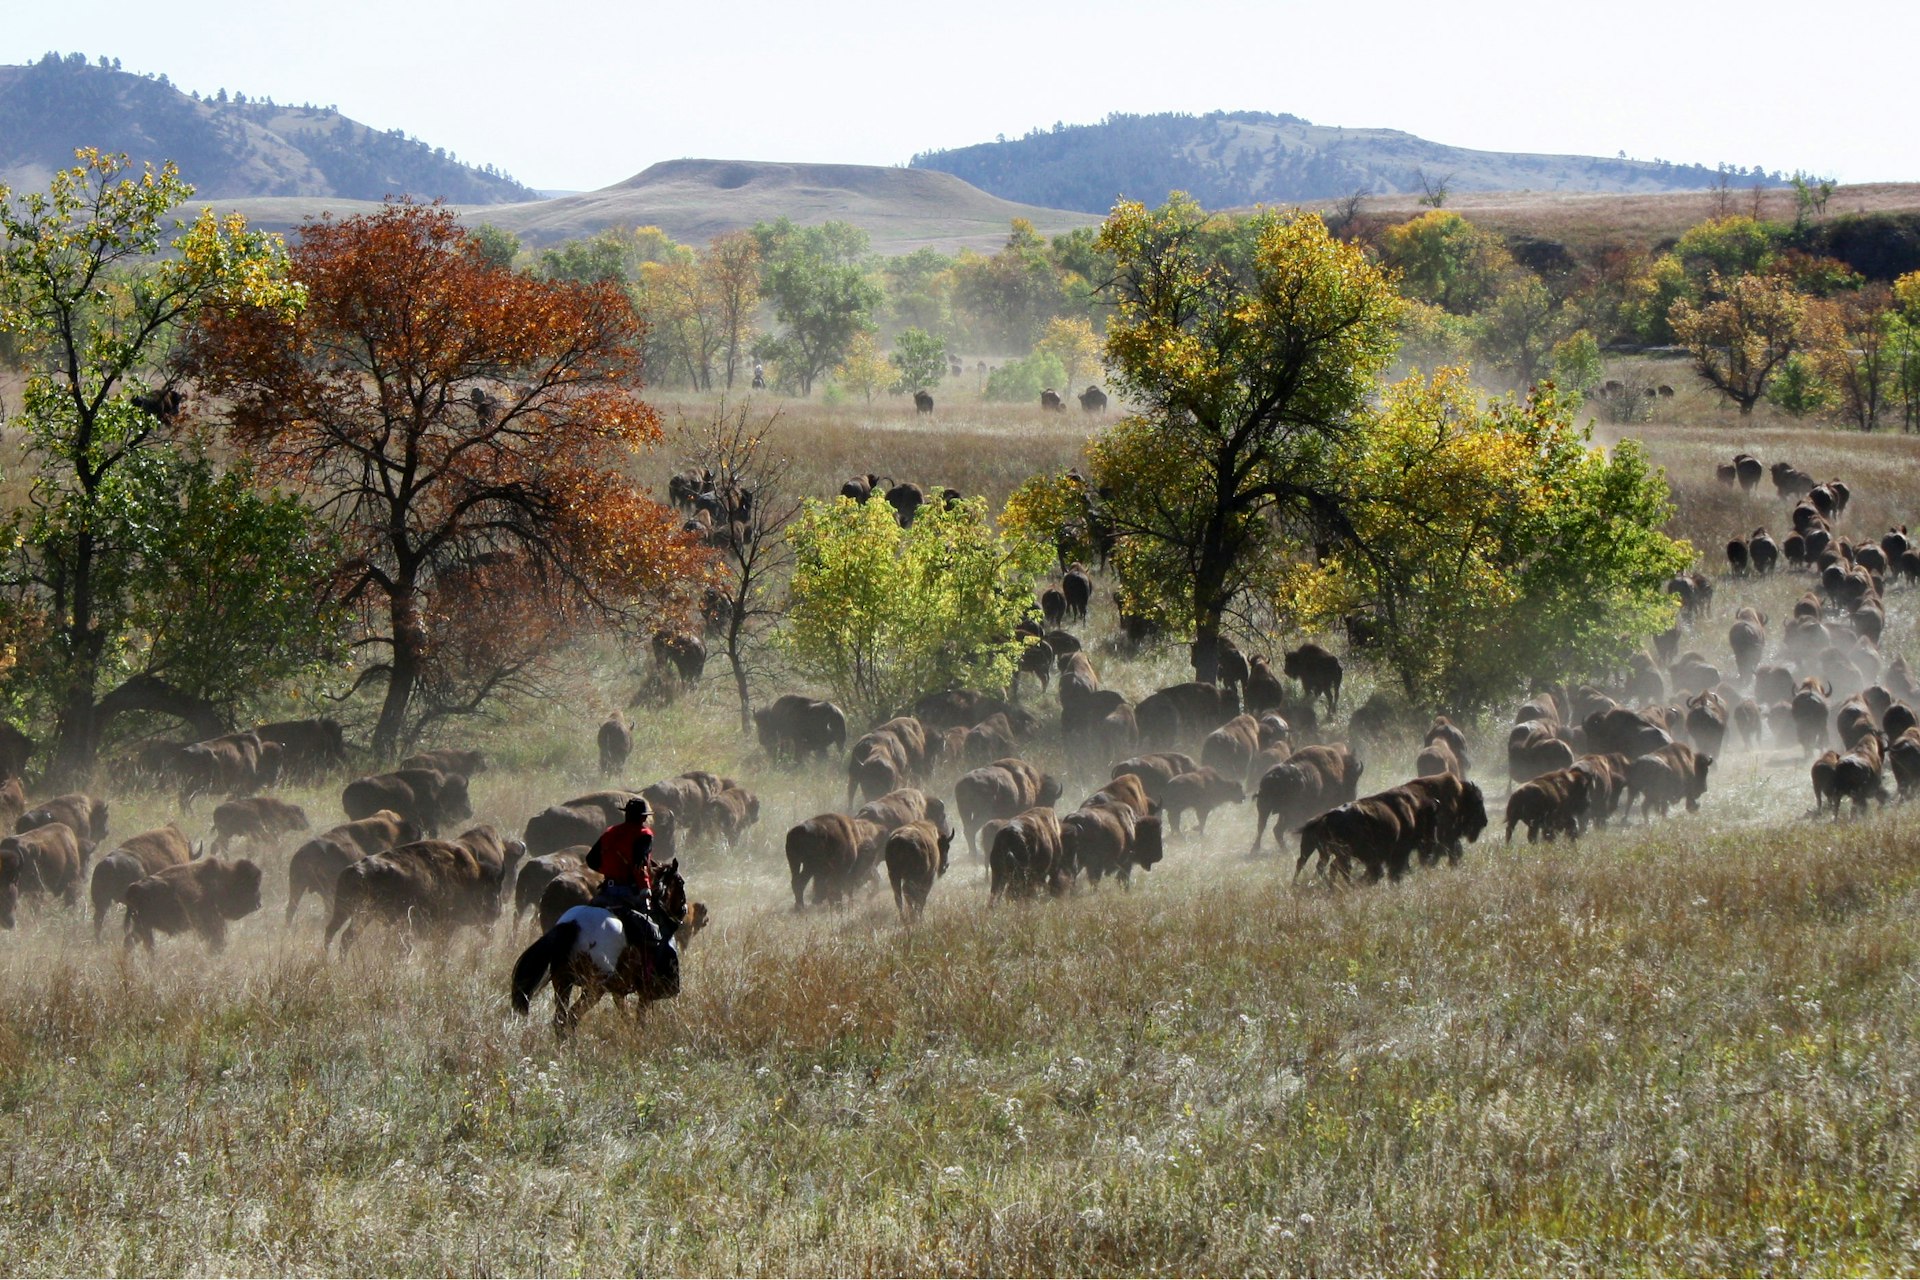 A cowboy drives a herd at the annual buffalo roundup at Custer State Park. Image by Alexander Howard / Lonely Planet